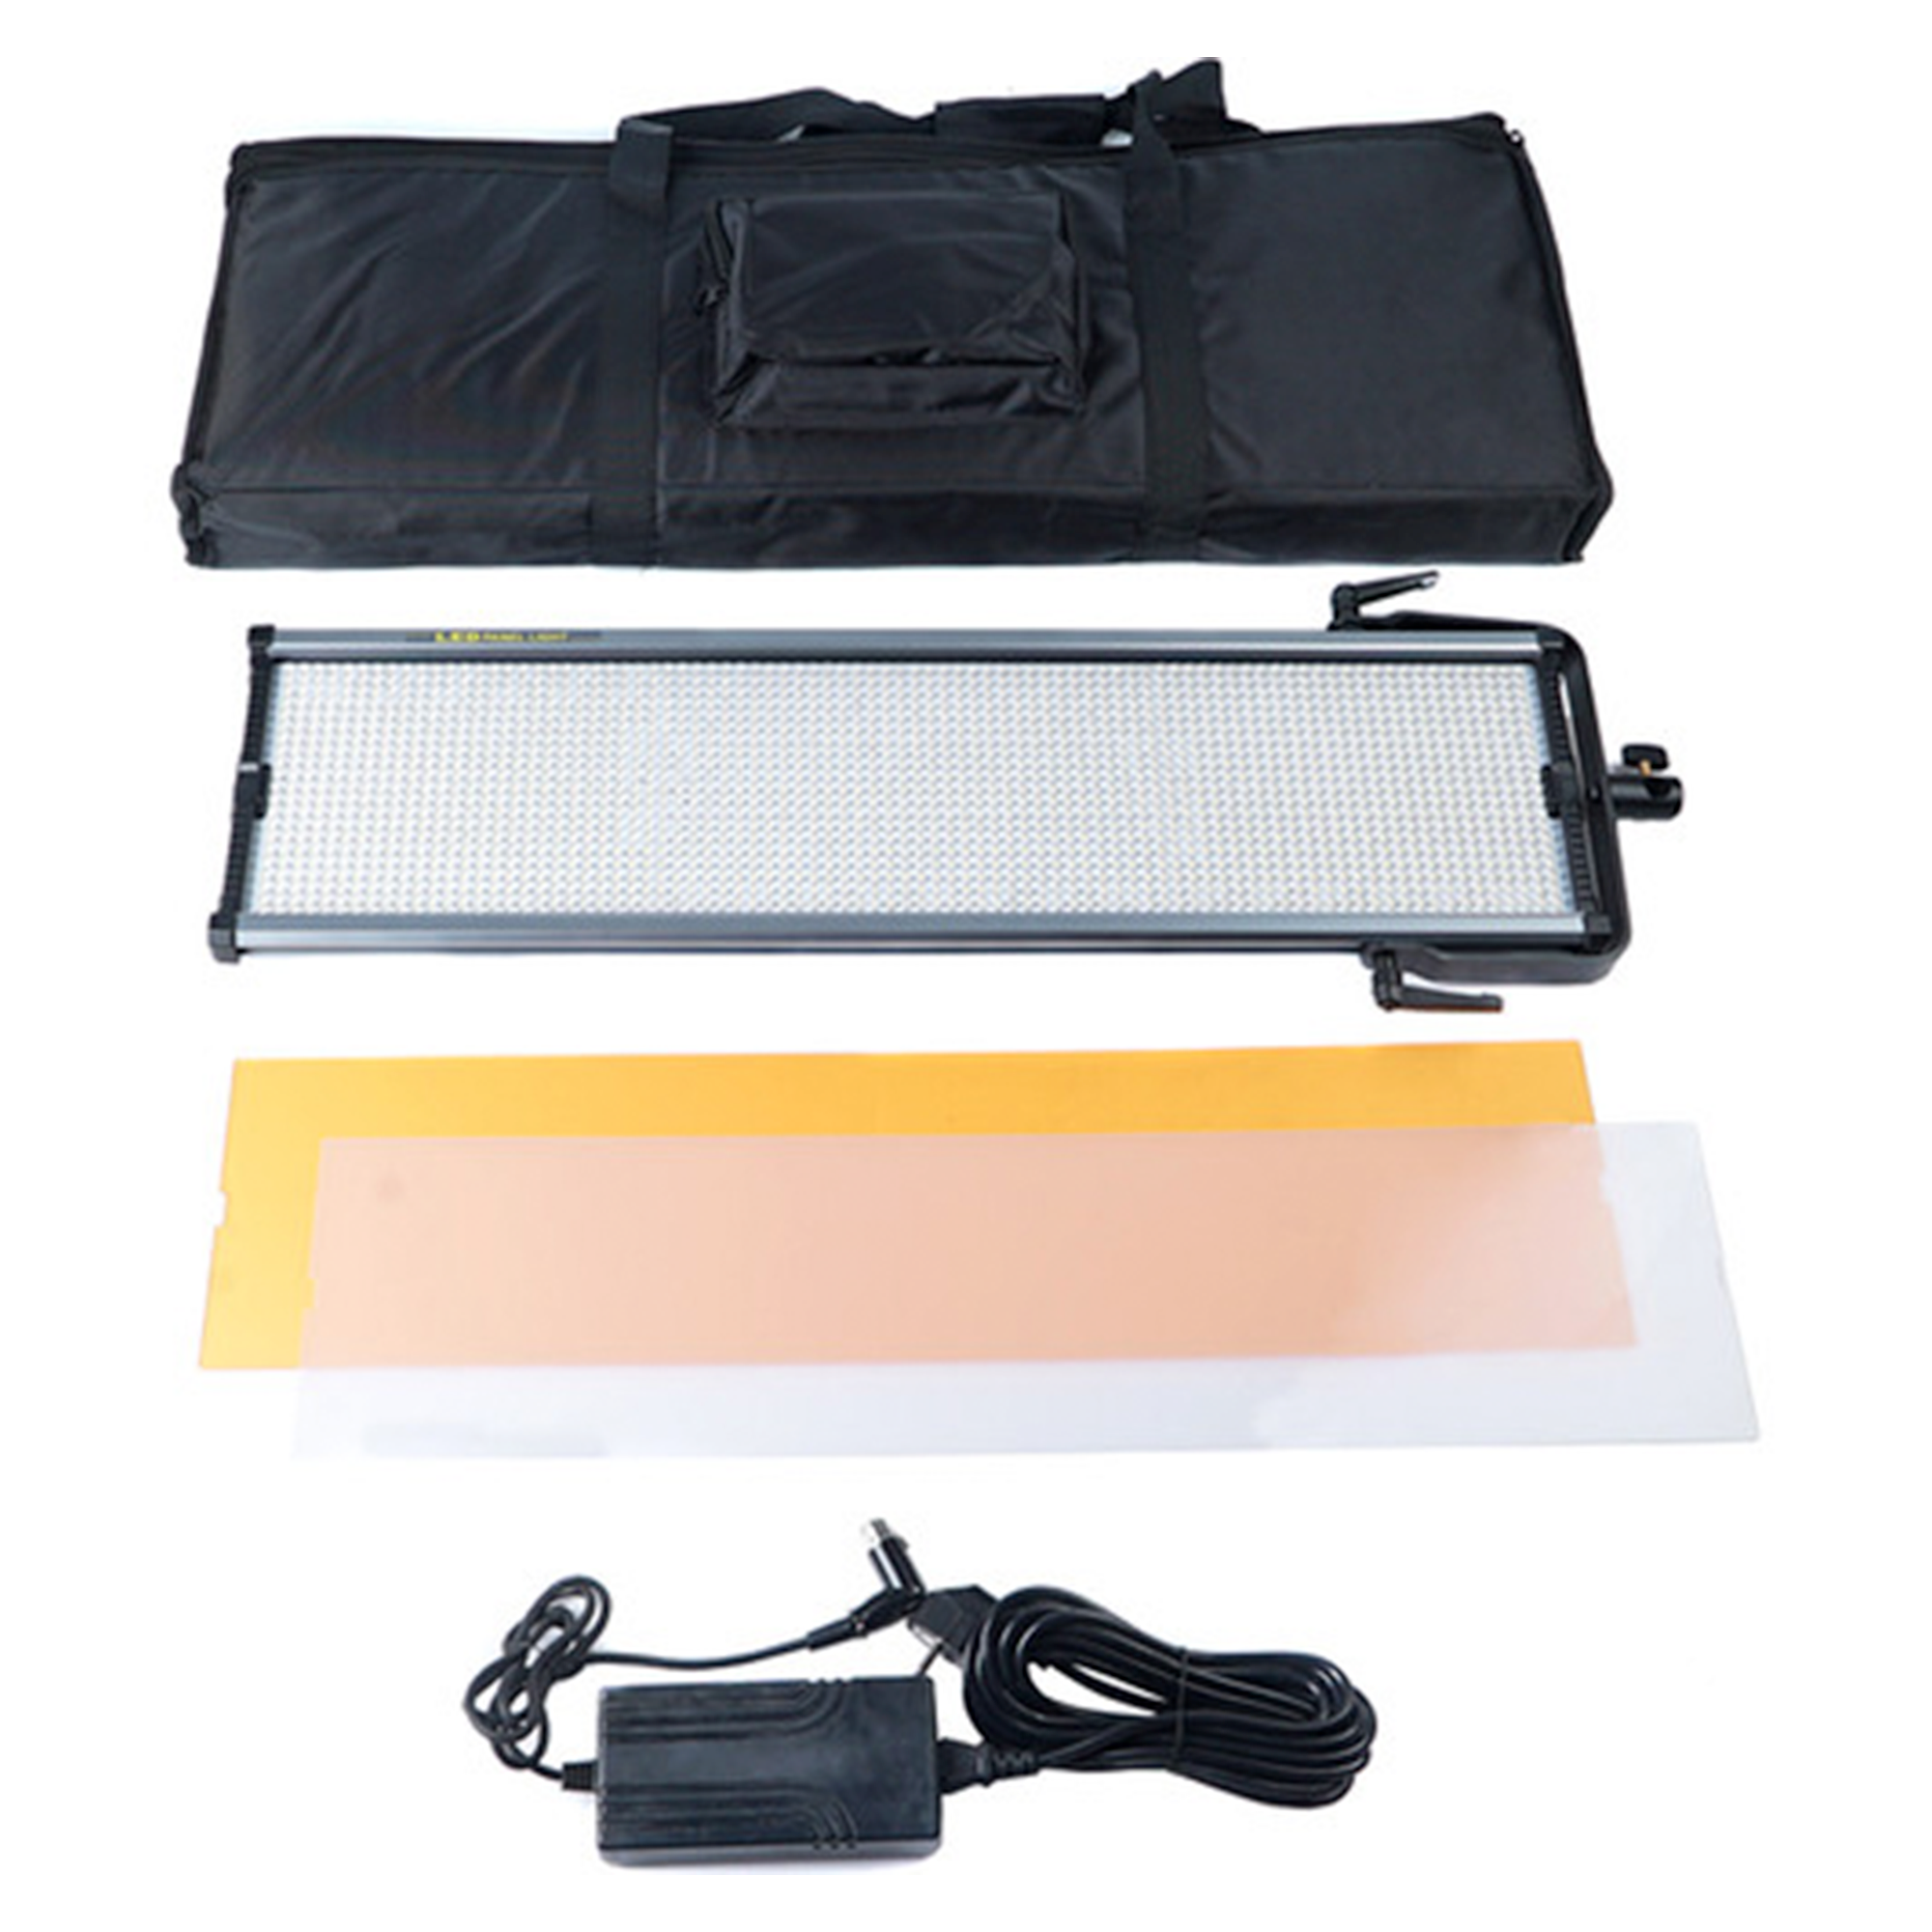 Came-TV 1806D Daylight LED Panel + Bags + PSU